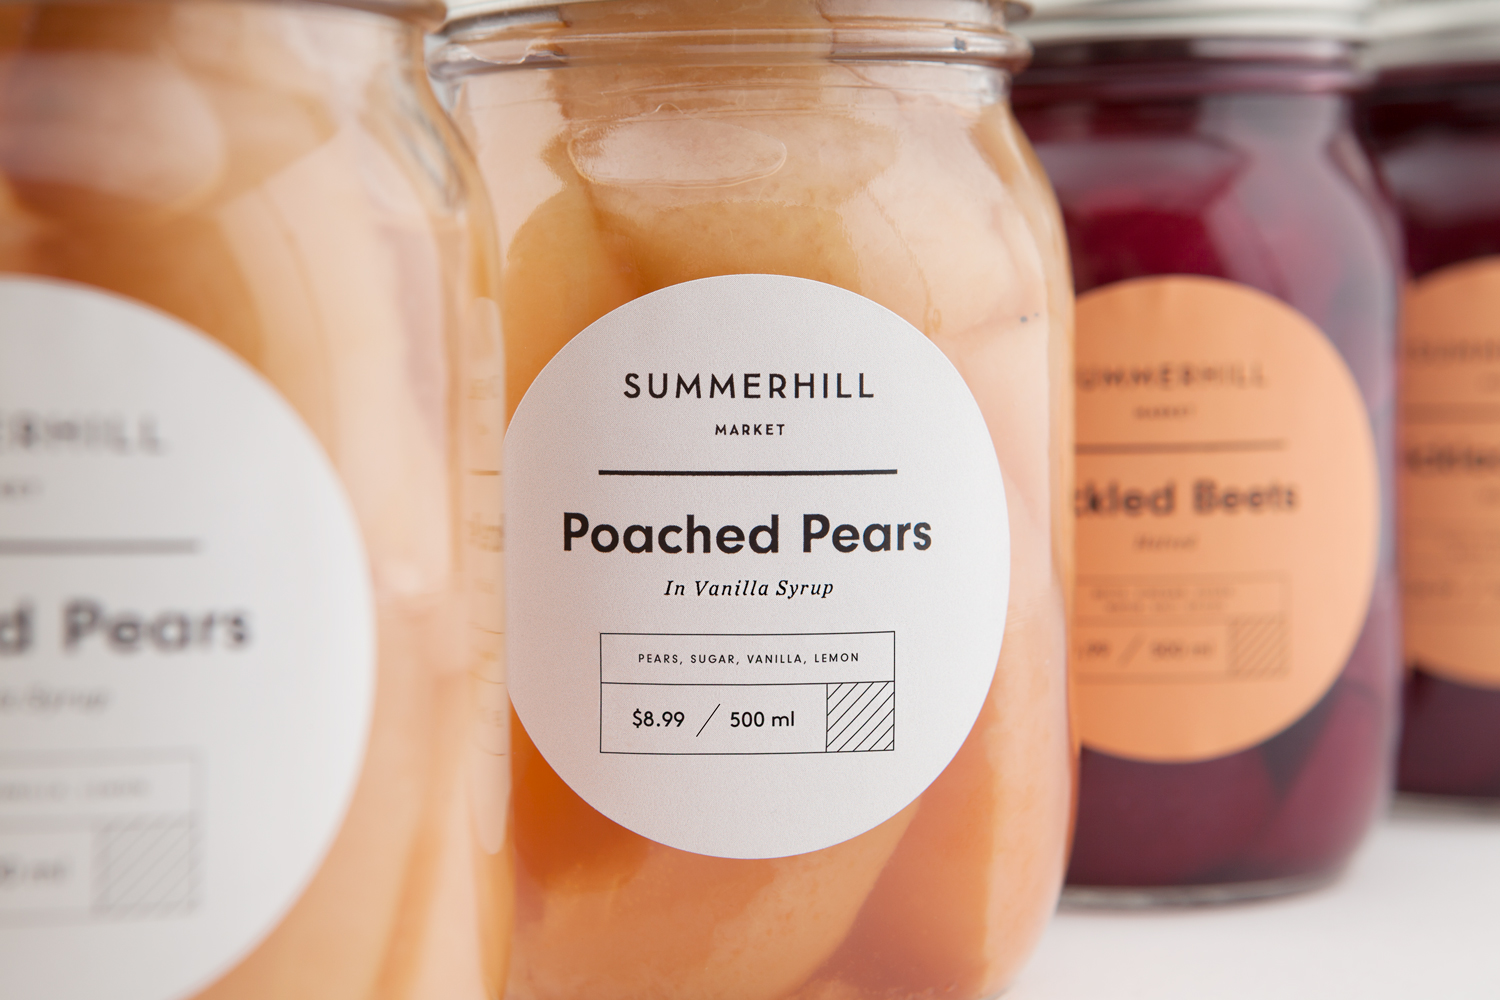 Branding and pear packaging designed by Canadian studio Blok for Toronto based boutique grocery store Summerhill Market